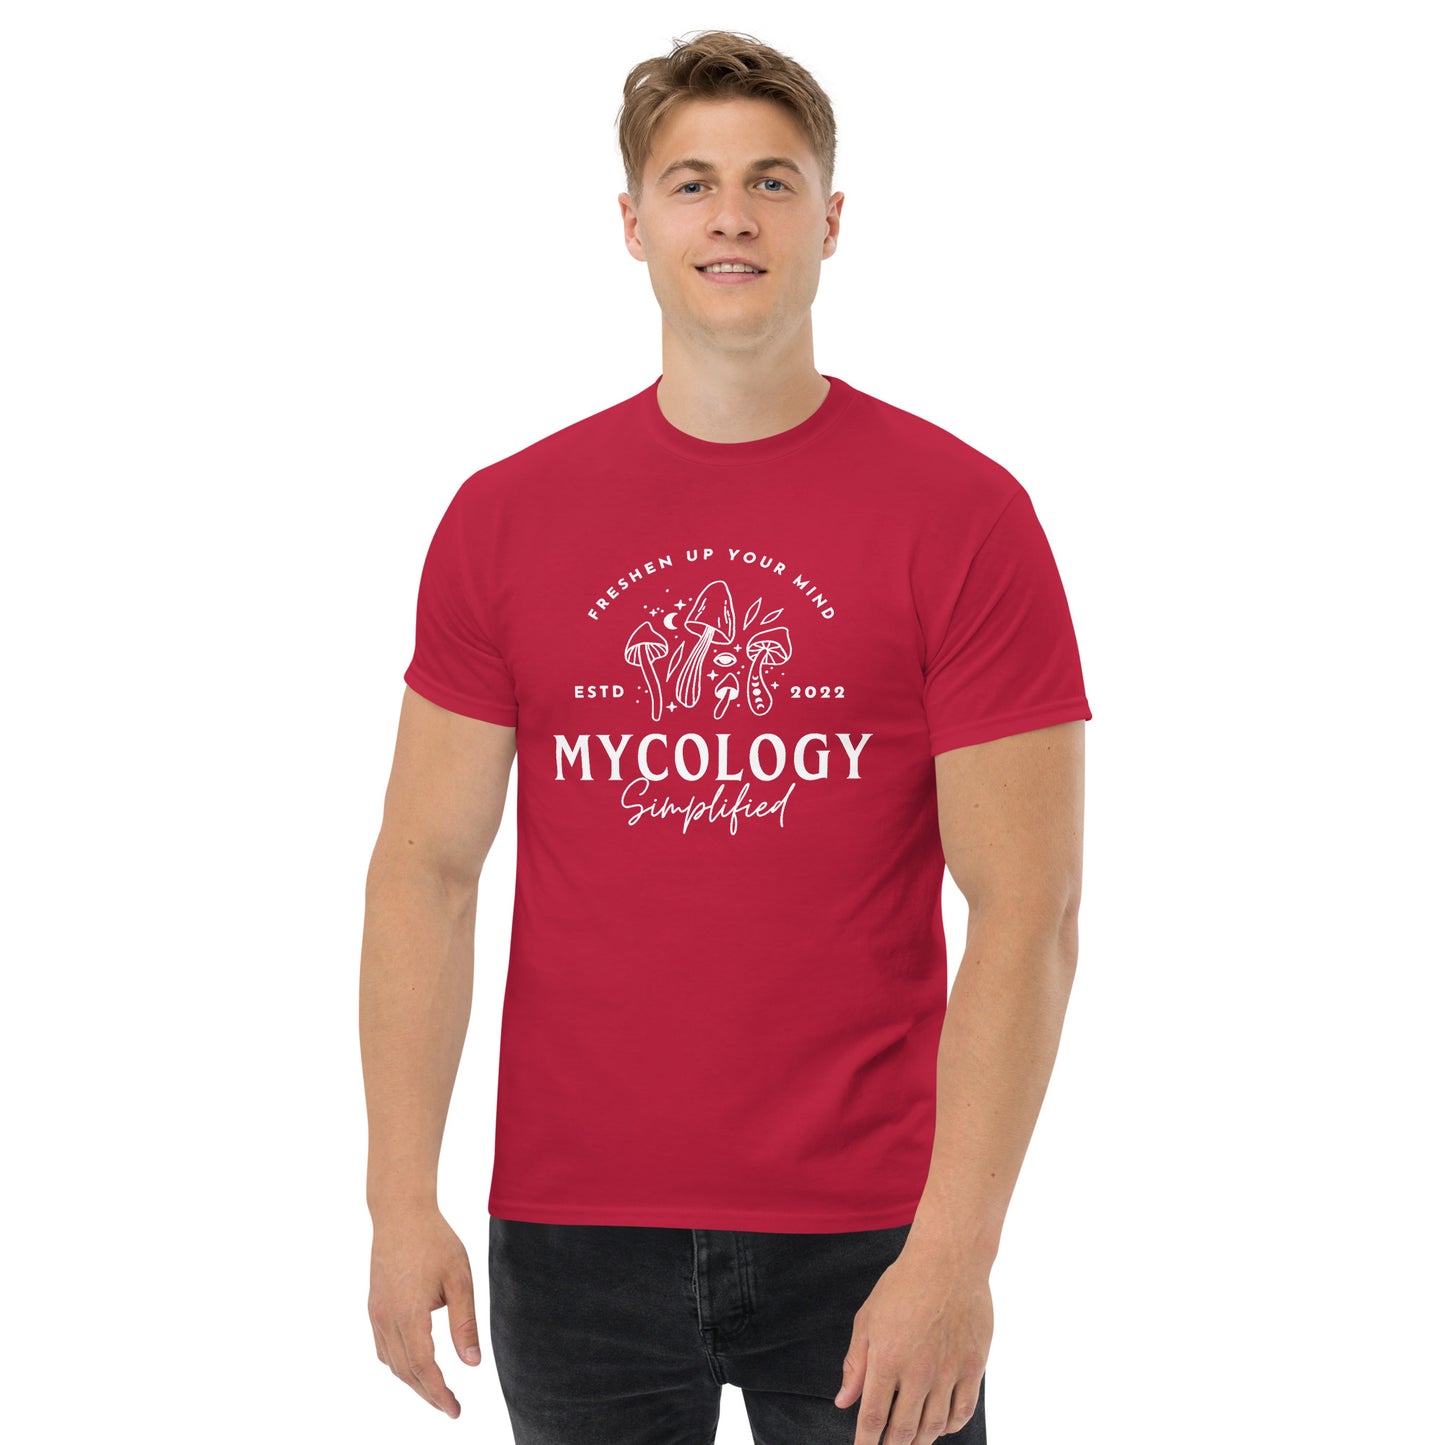 Mycology Simplified Tee WHTTXT - Mycologysimplified